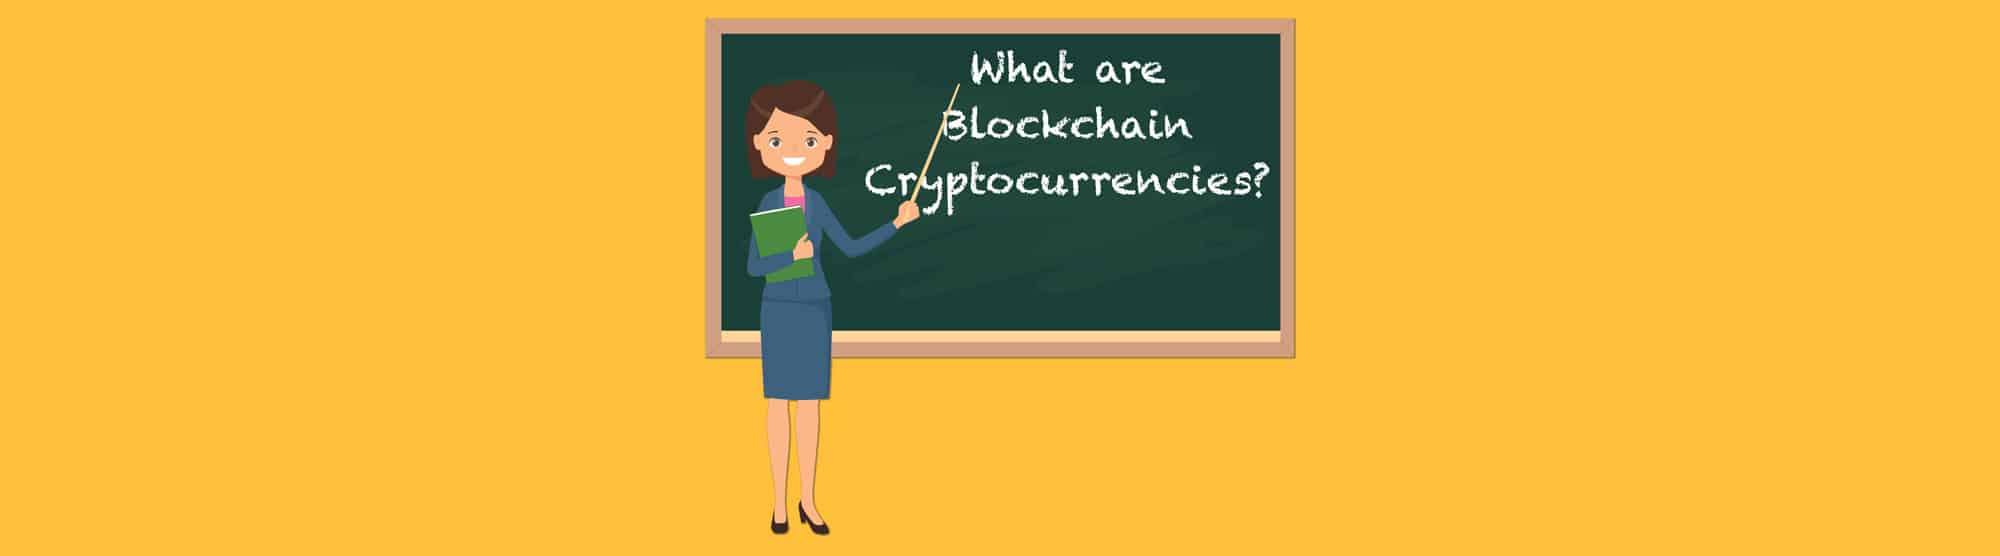 What are Blockchain Cryptocurrencies